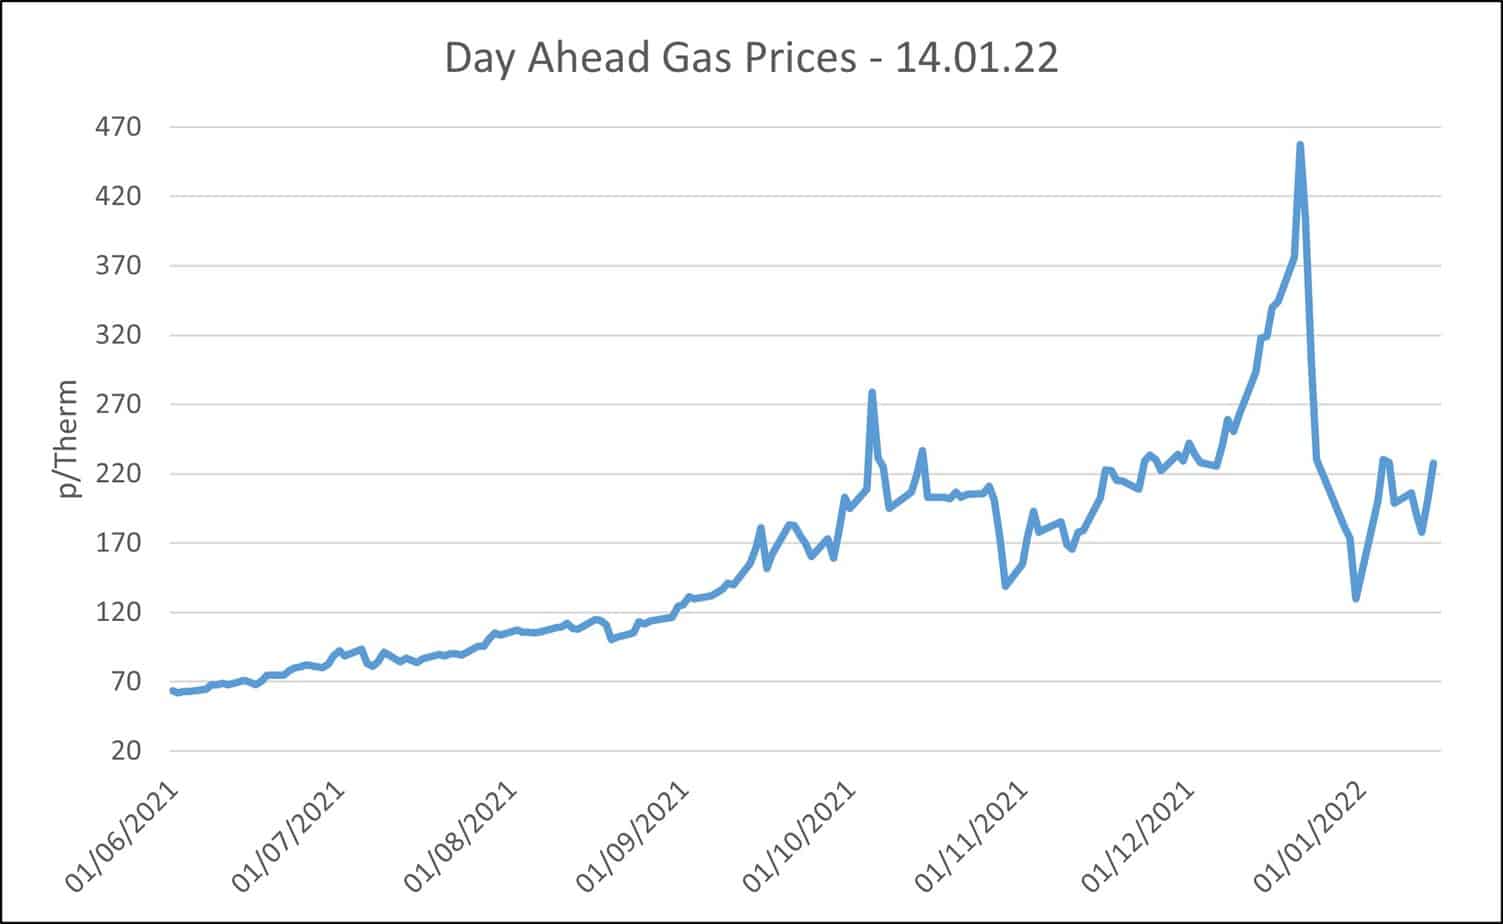 day ahead gas prices - 14.01.22